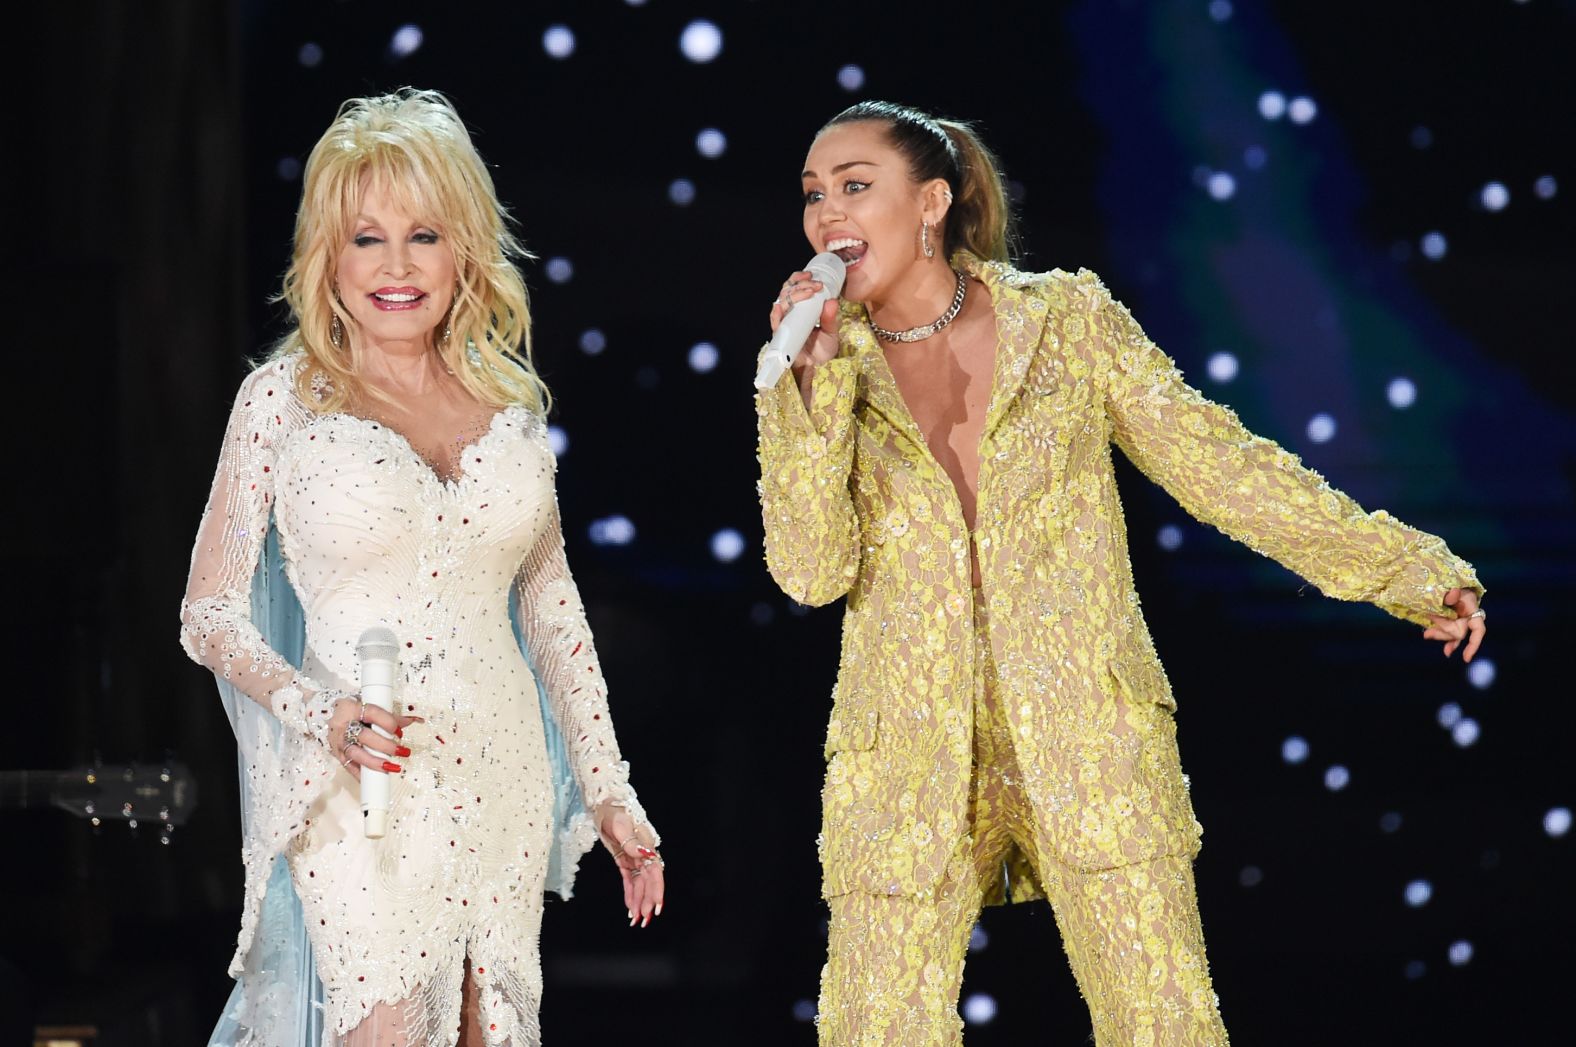 Miley Cyrus sings with Parton during the tribute, which included the songs "Here You Come Again," "Jolene" and "9 to 5."